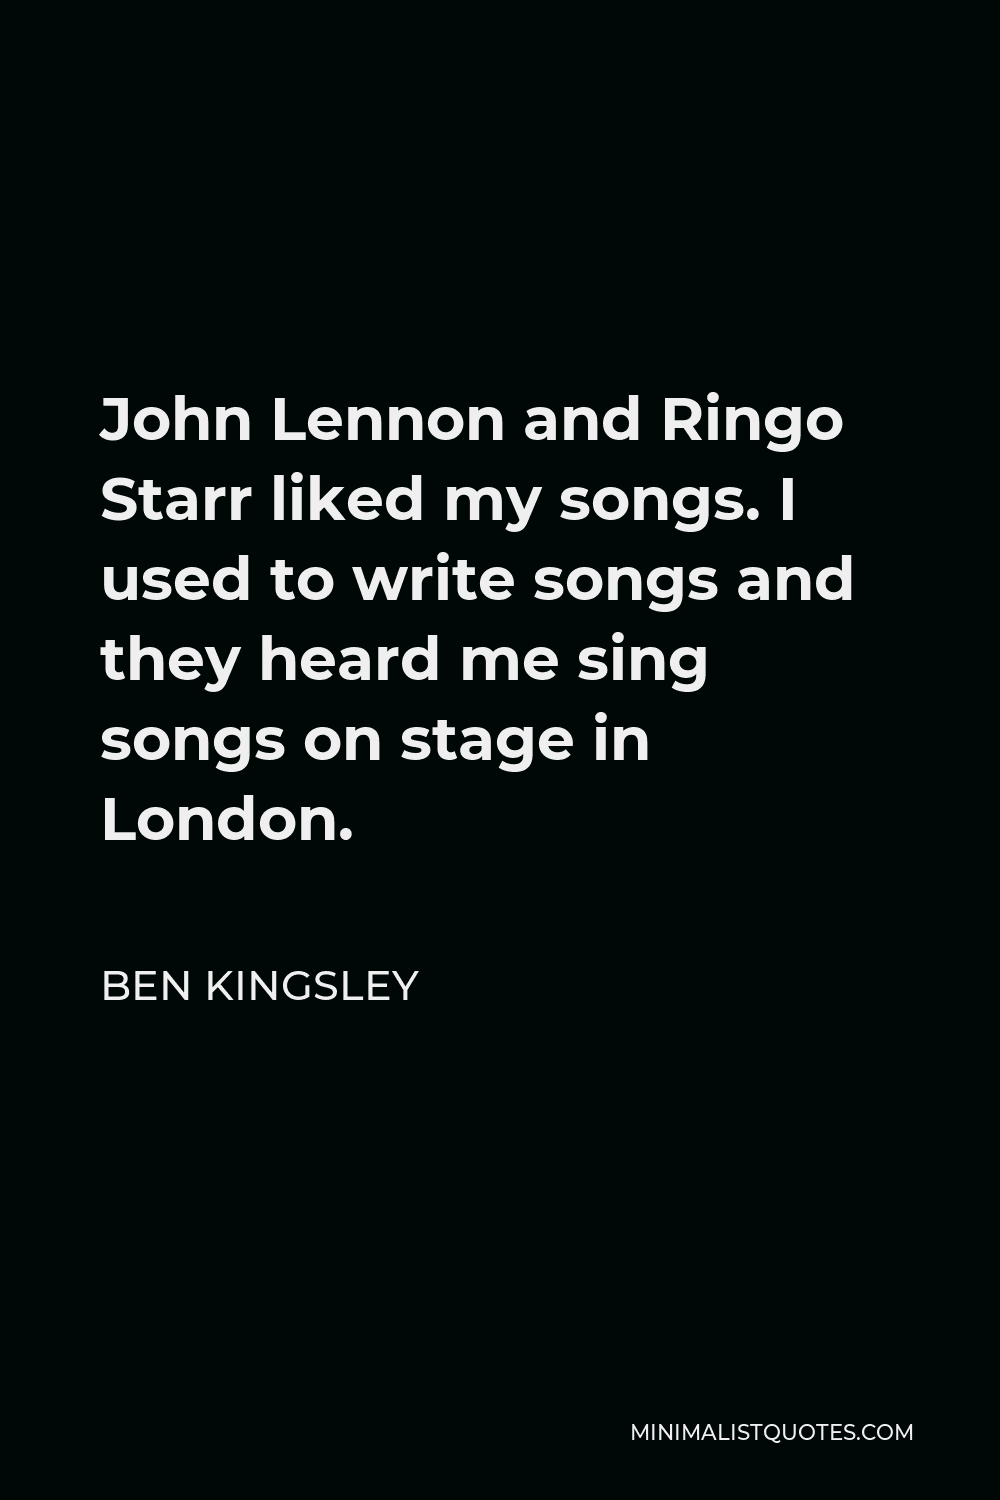 Ben Kingsley Quote - John Lennon and Ringo Starr liked my songs. I used to write songs and they heard me sing songs on stage in London.